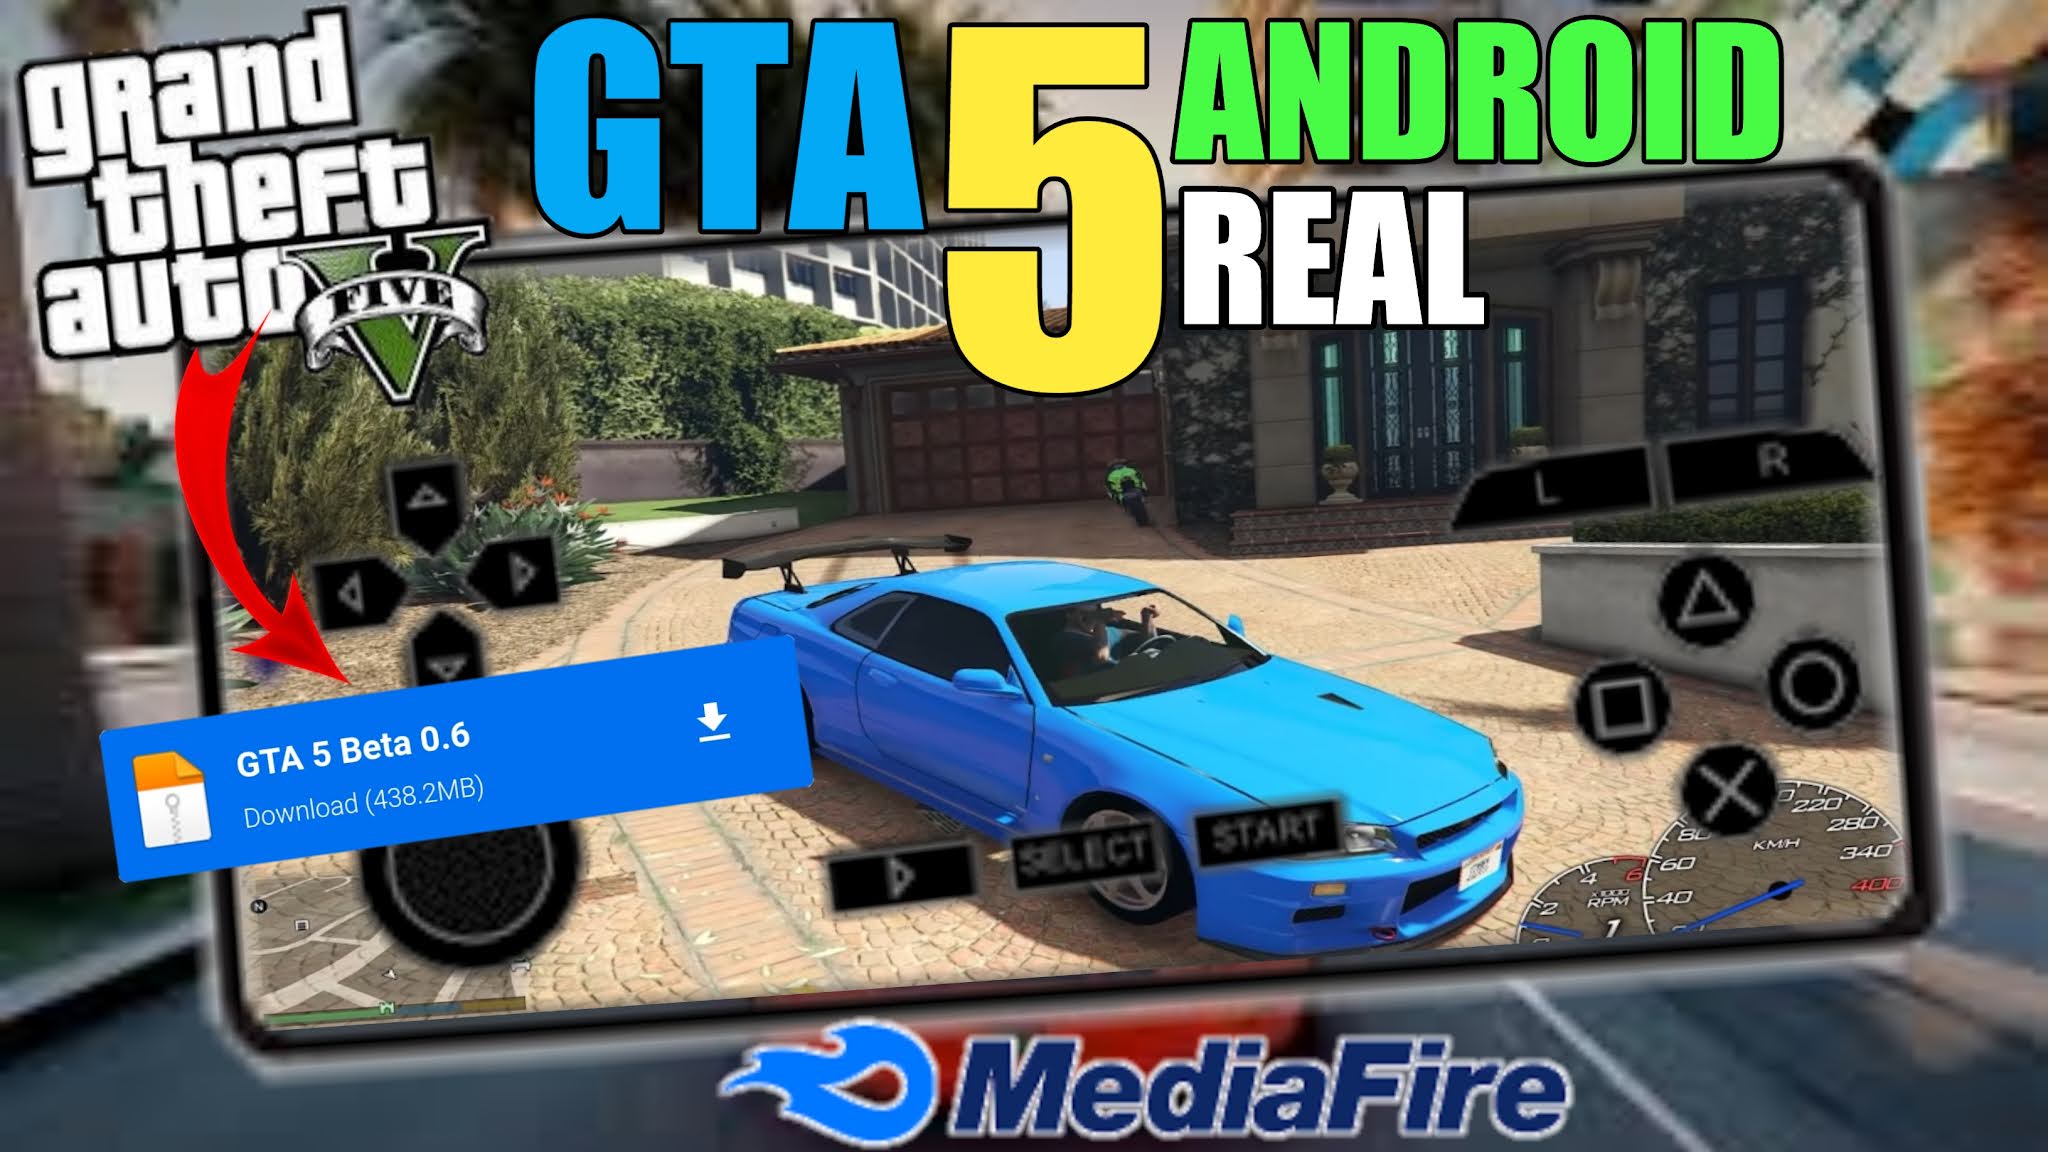 Gta 5 on android mobile фото 96